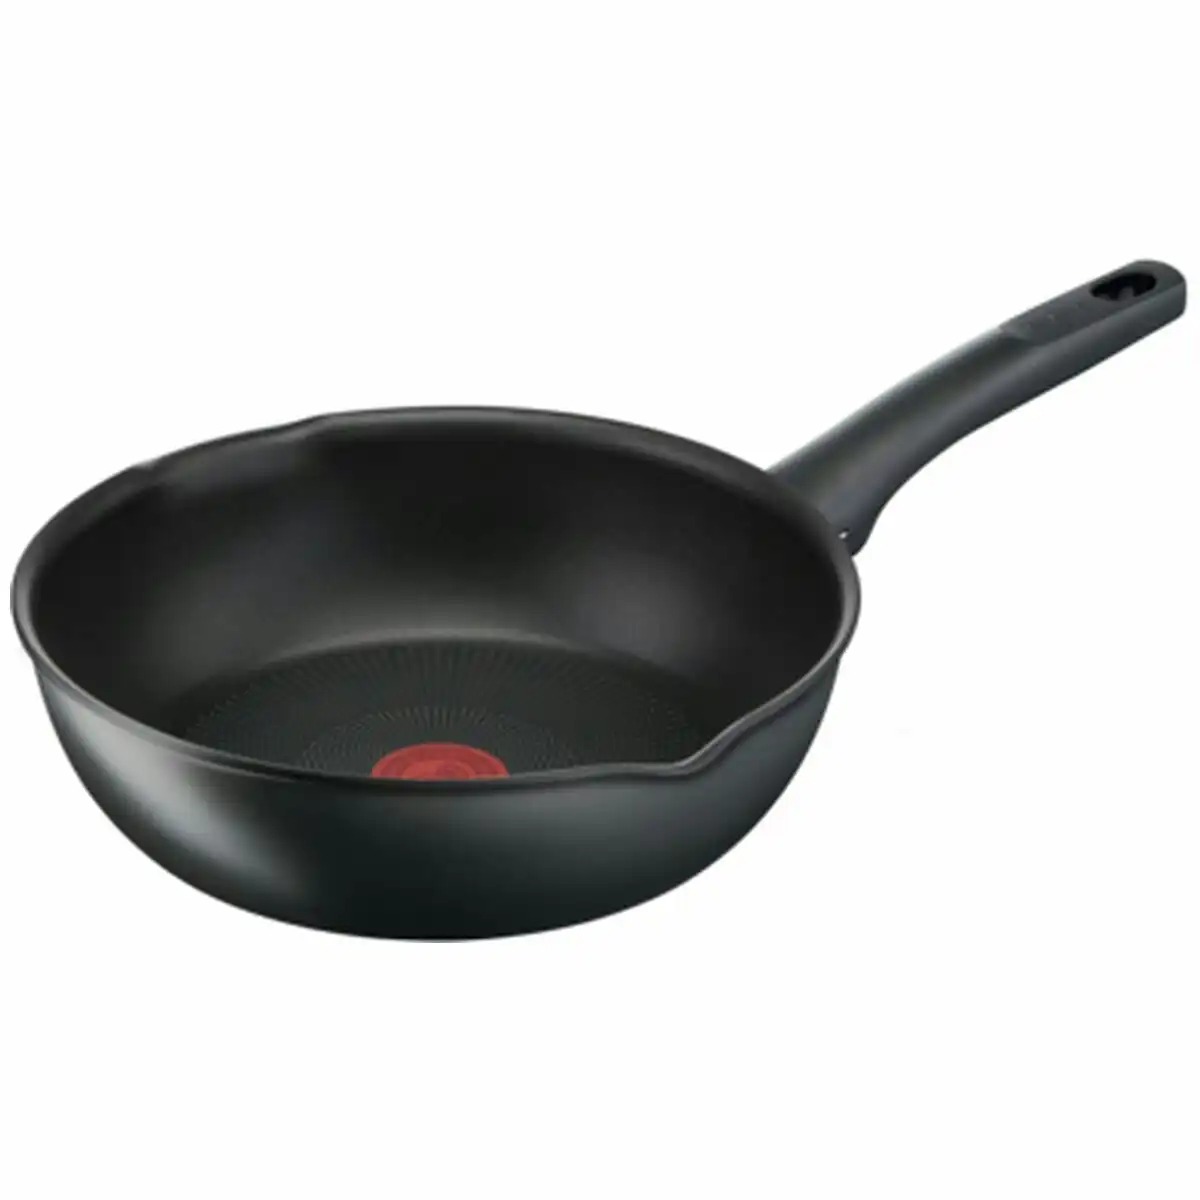 Tefal Ultimate Non-stick Induction Multipan 26cm